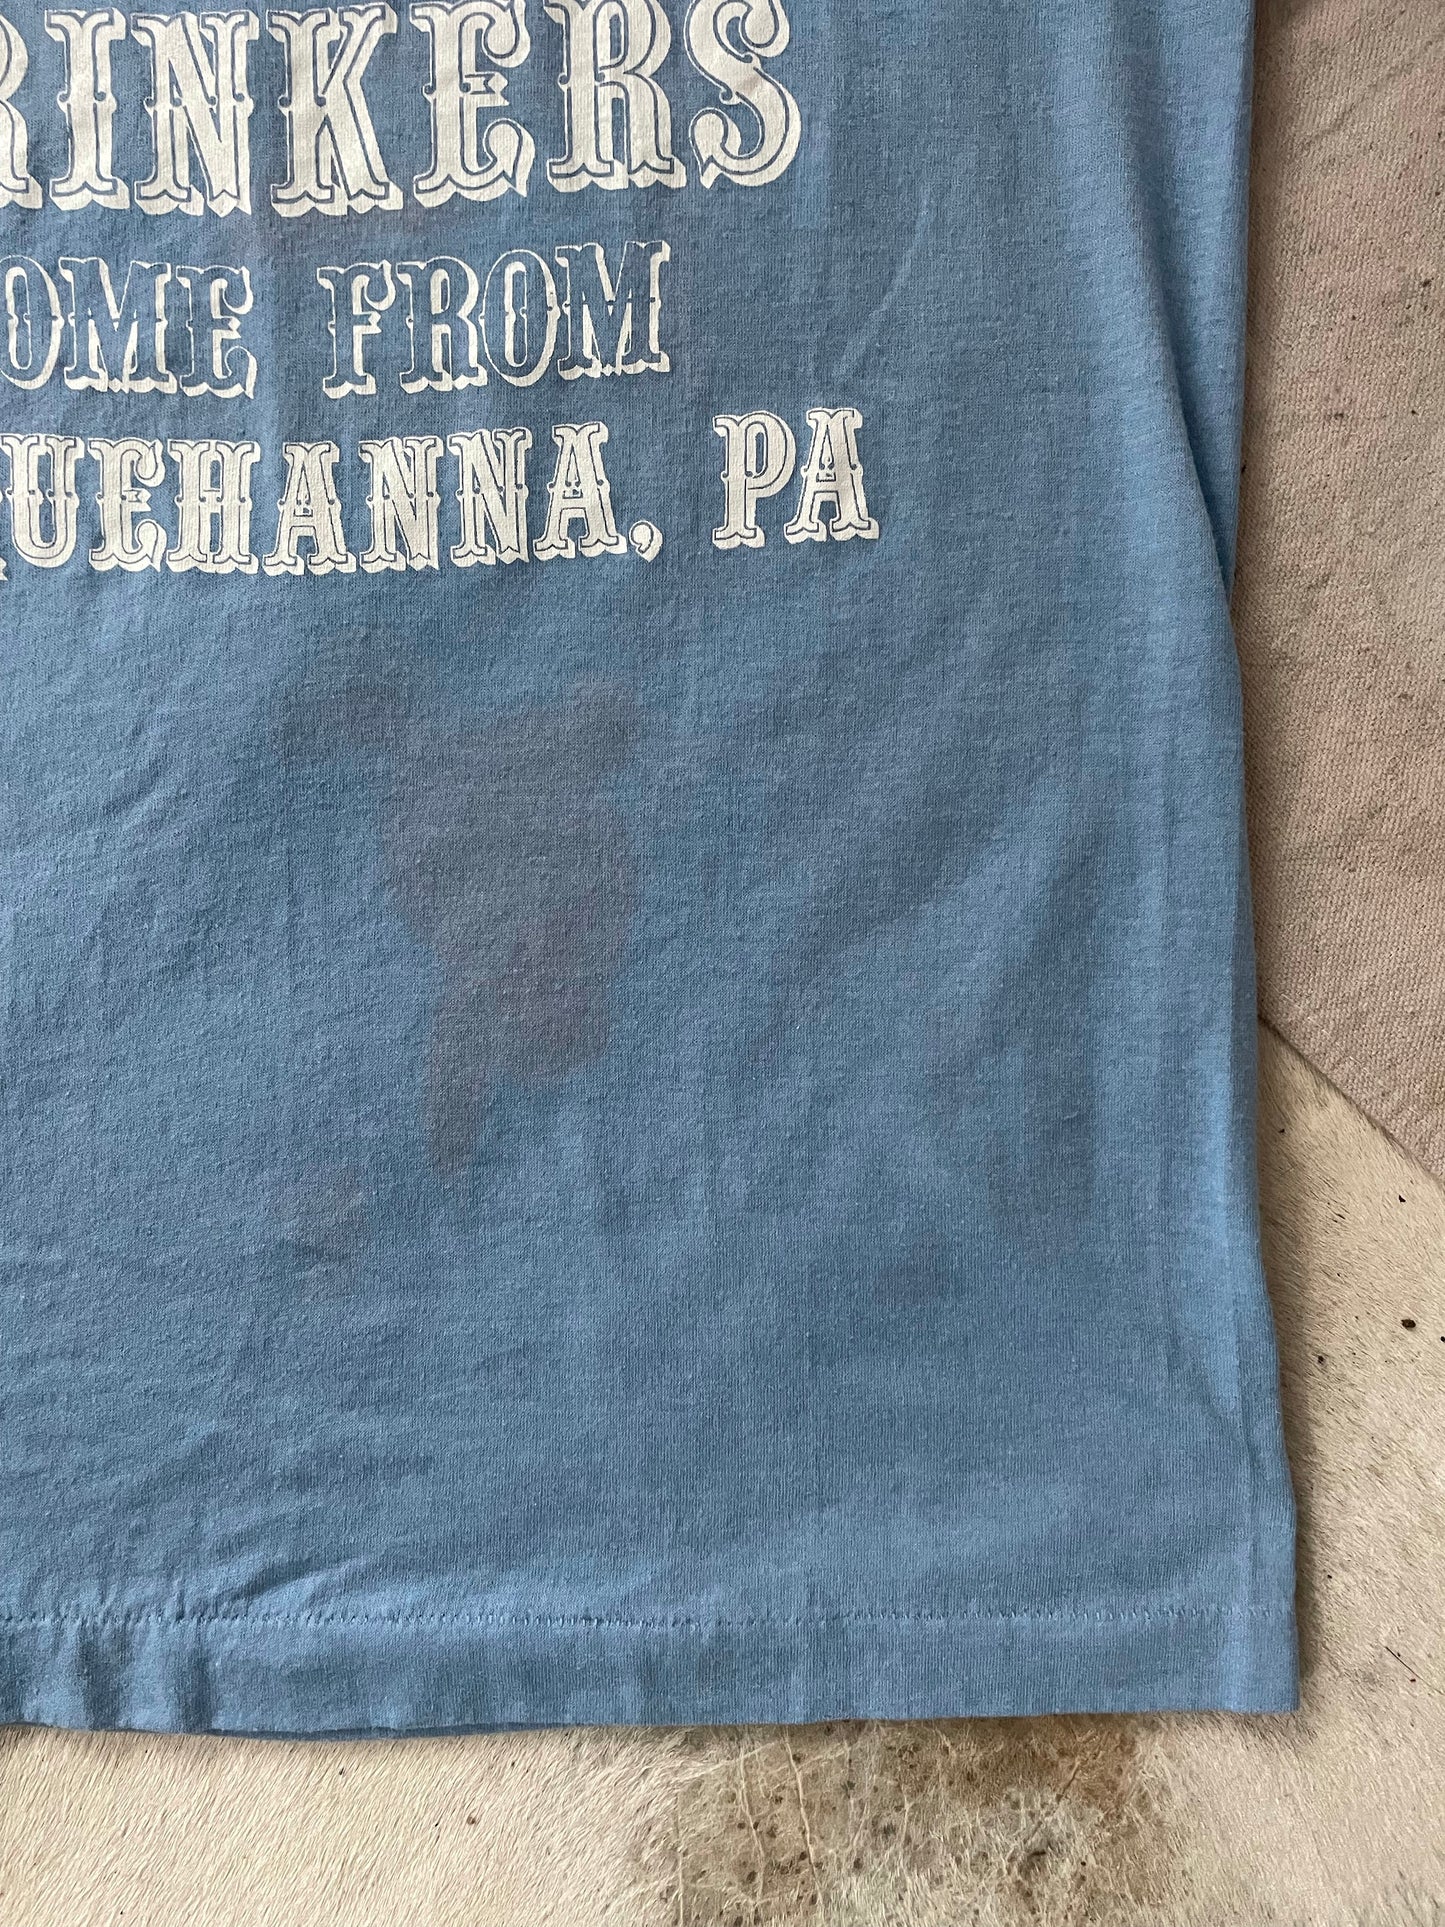 The Best Beer Drinkers Come From Susquehanna, PA Tee